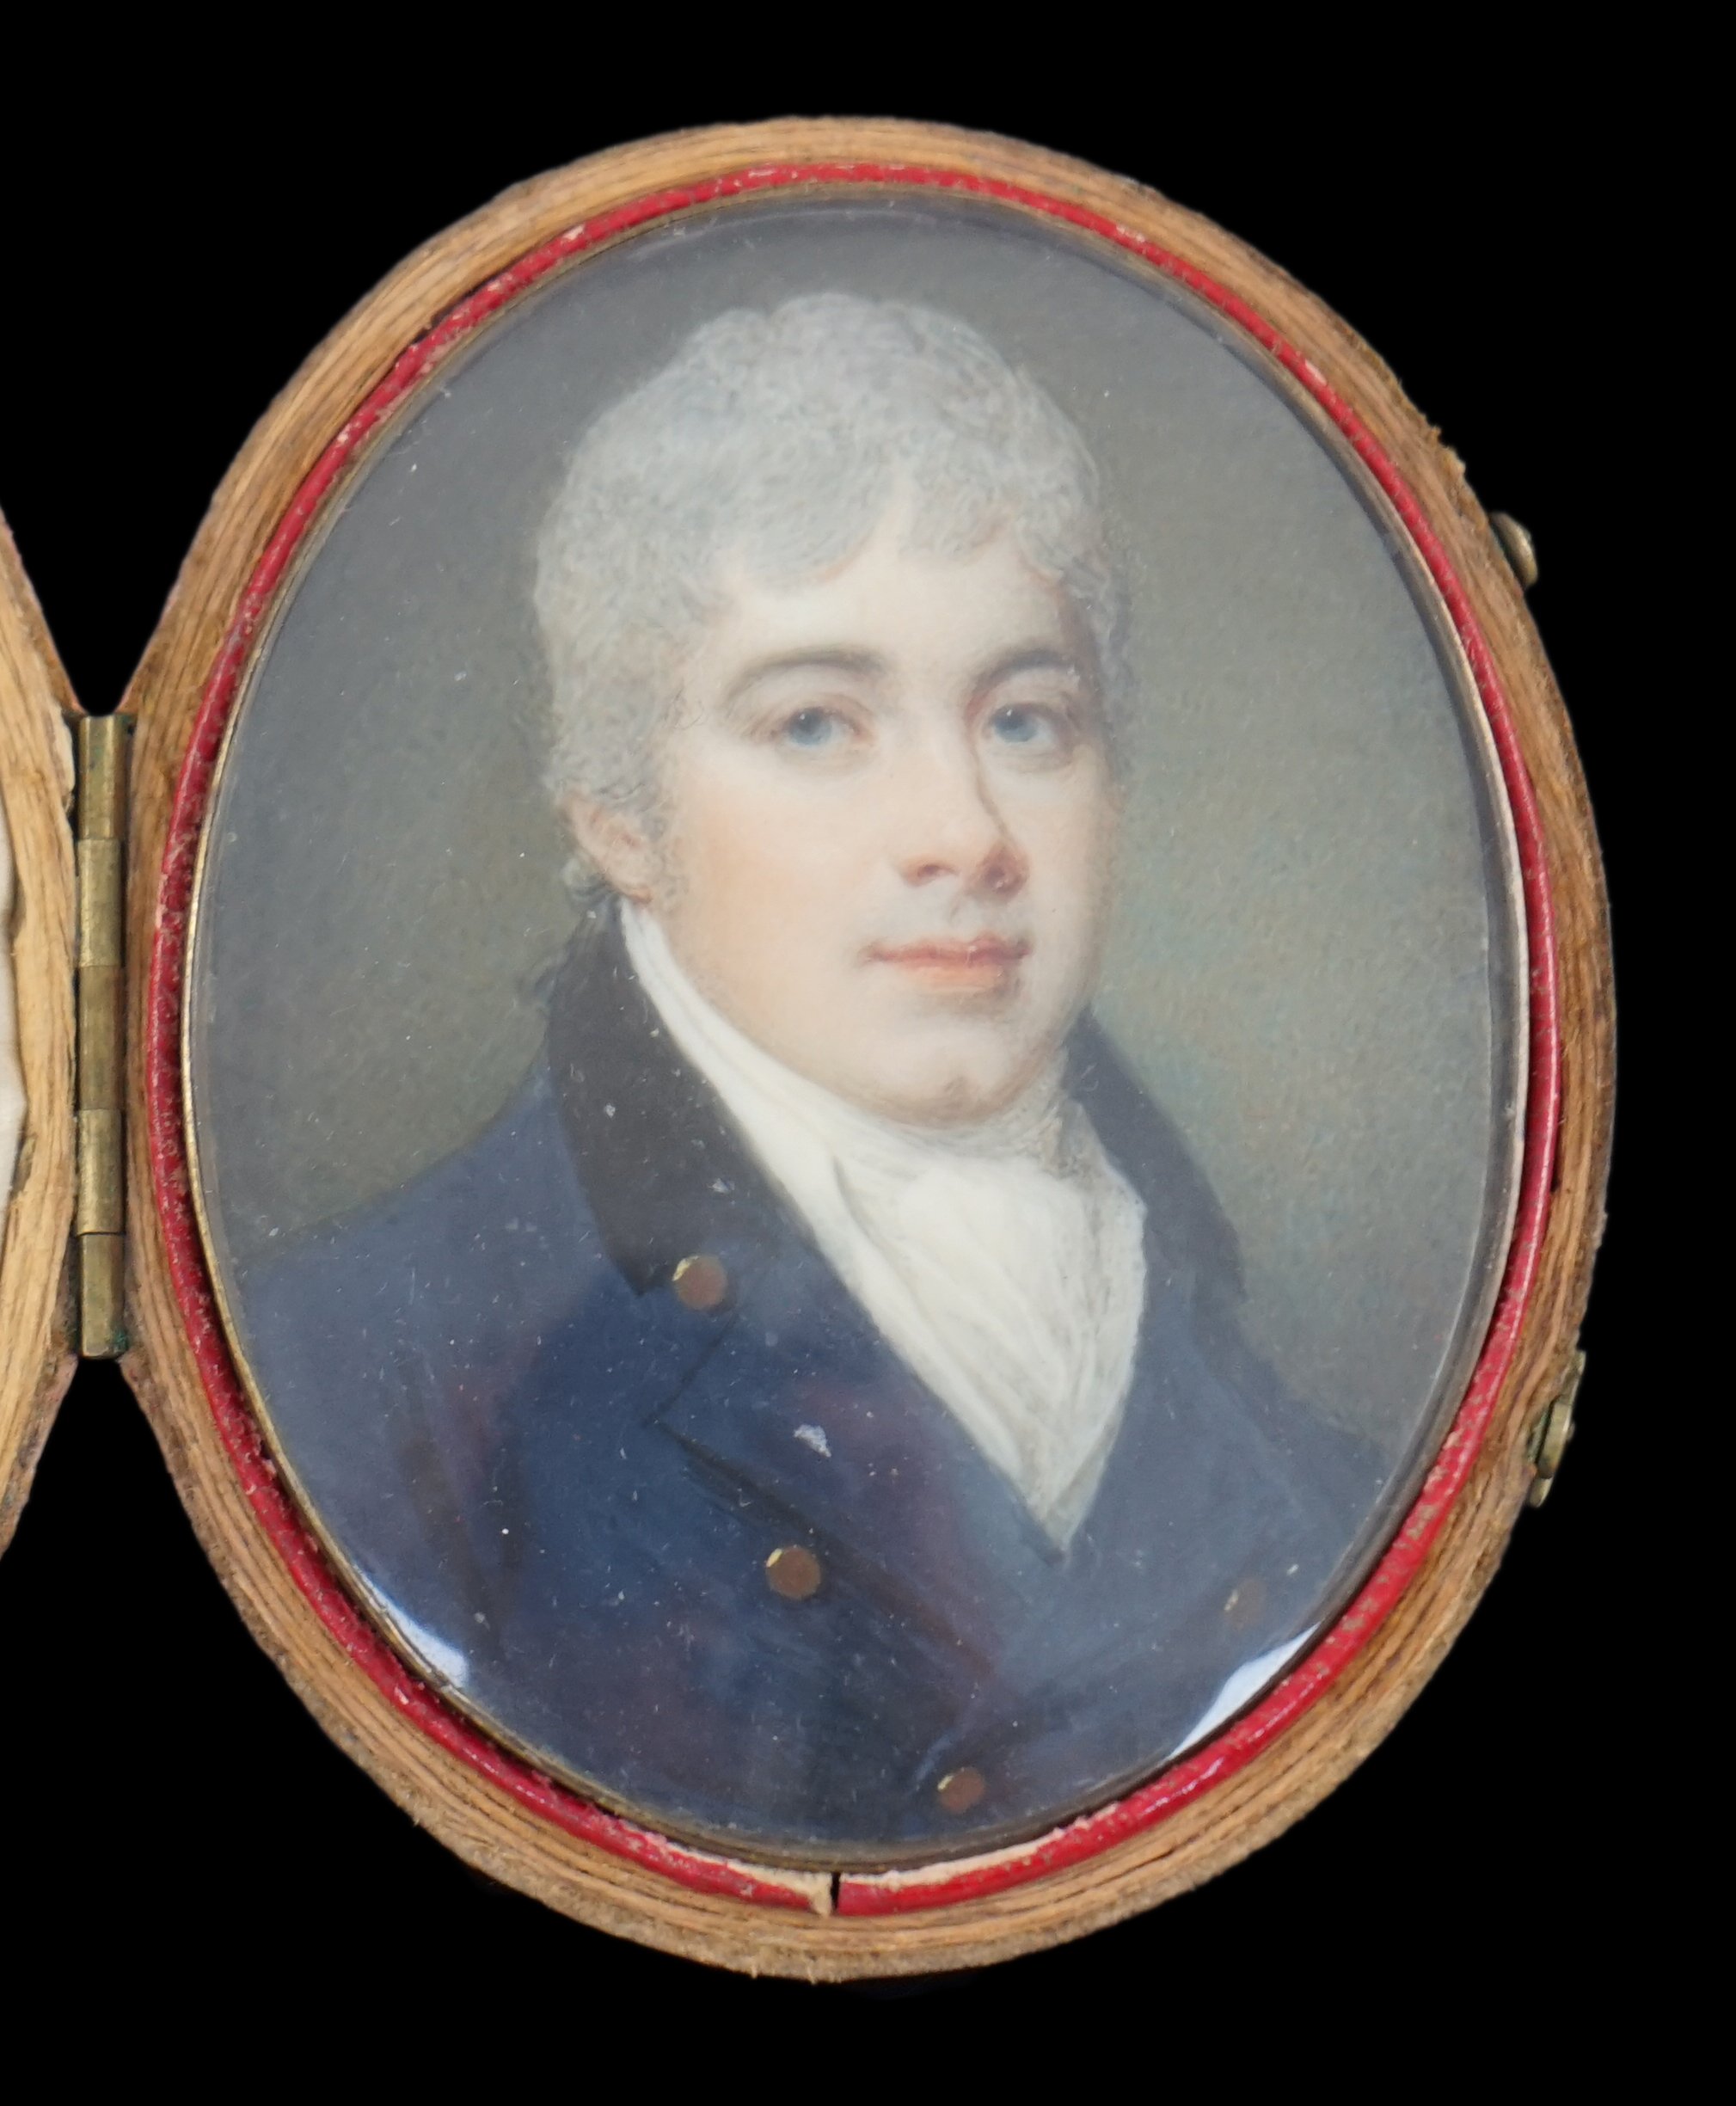 Samuel Shelley (1750-1808), Portrait miniature of a gentleman, watercolour on ivory, 6.6 x 5.3cm. CITES Submission reference N1LU811F